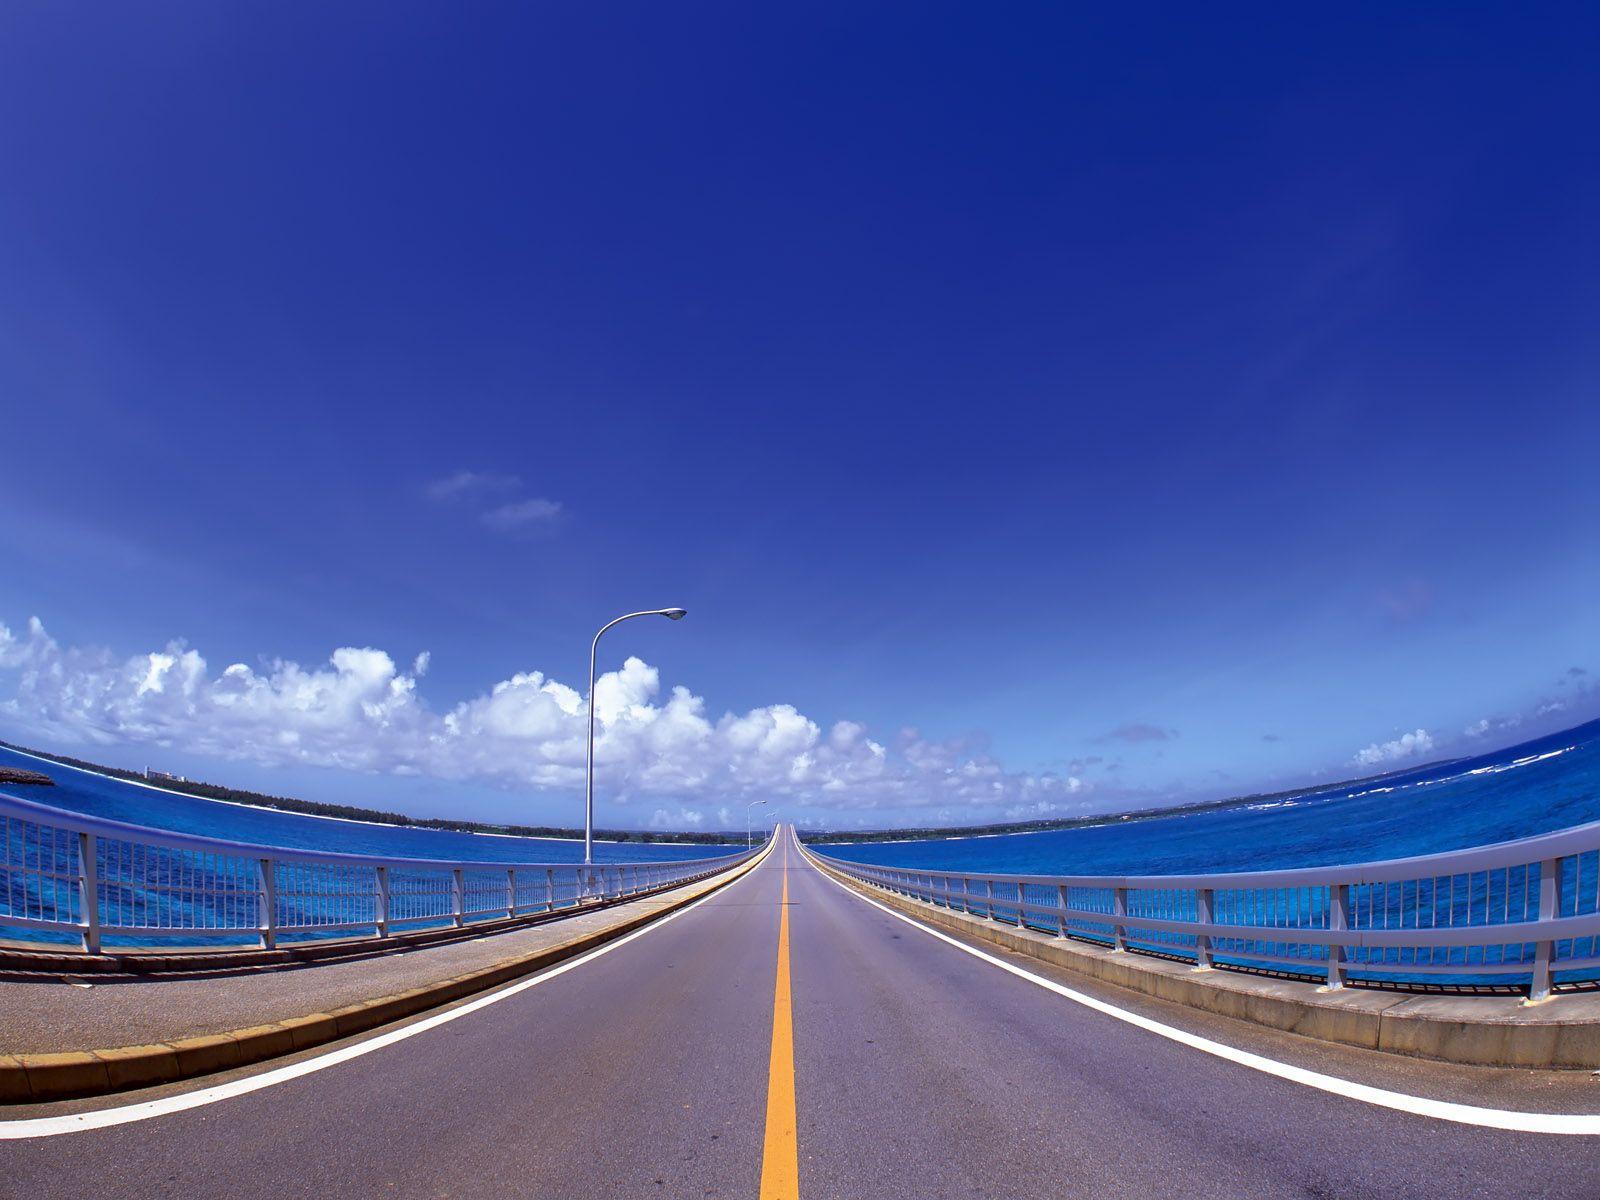 Long road wallpaper and image, picture, photo